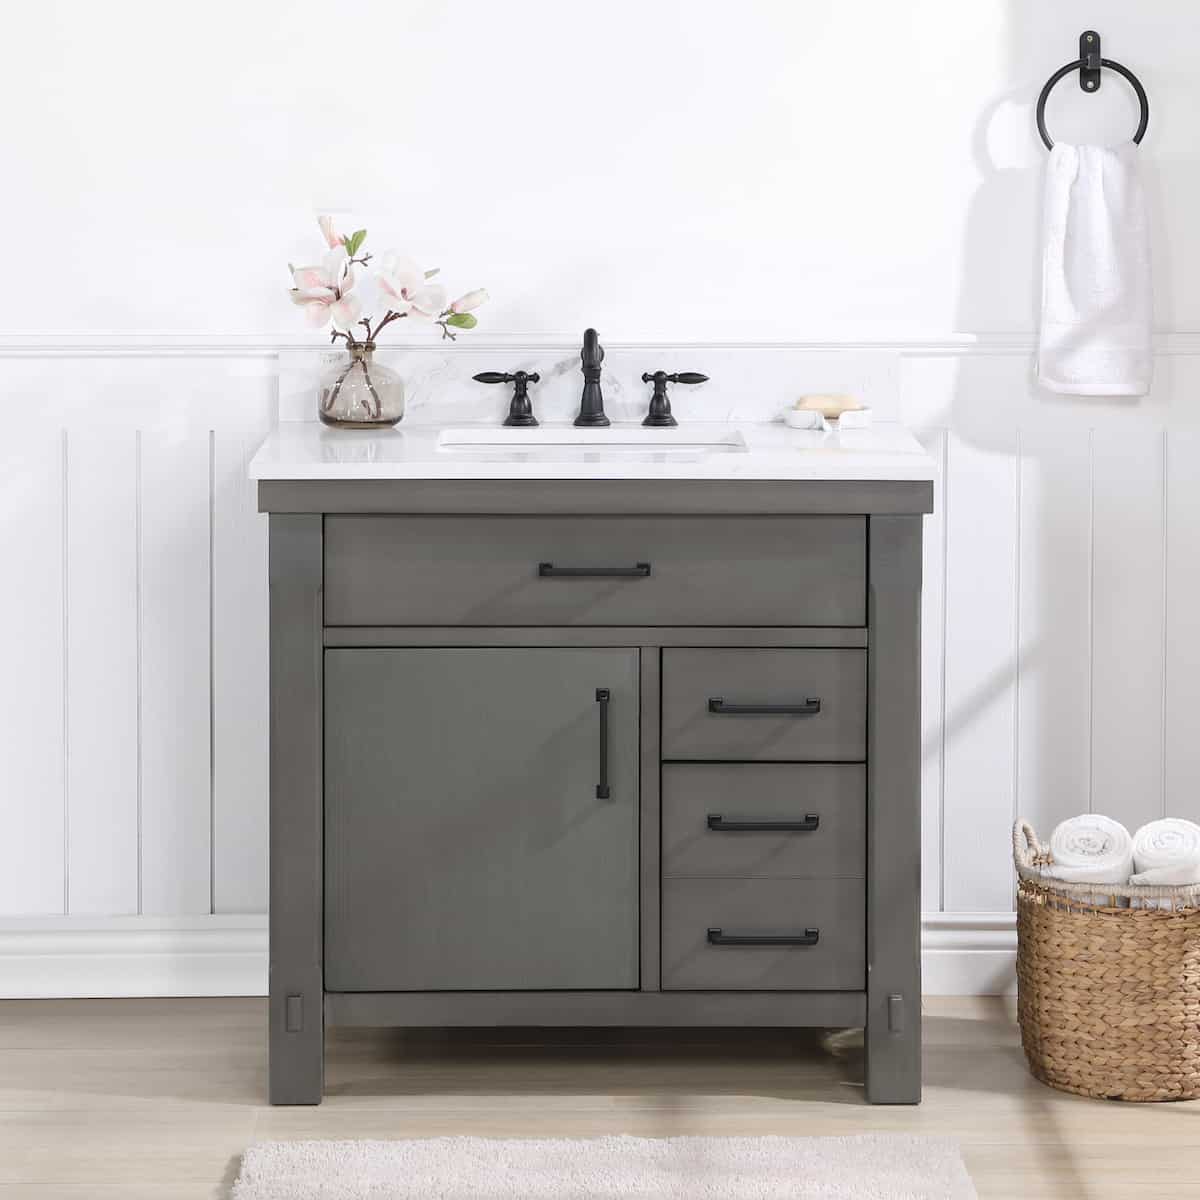 Vinnova Viella 36 Inch Freestanding Single Sink Bath Vanity in Rust Grey Finish with White Composite Countertop Without Mirror in Bathroom 701836-RU-WS-NM